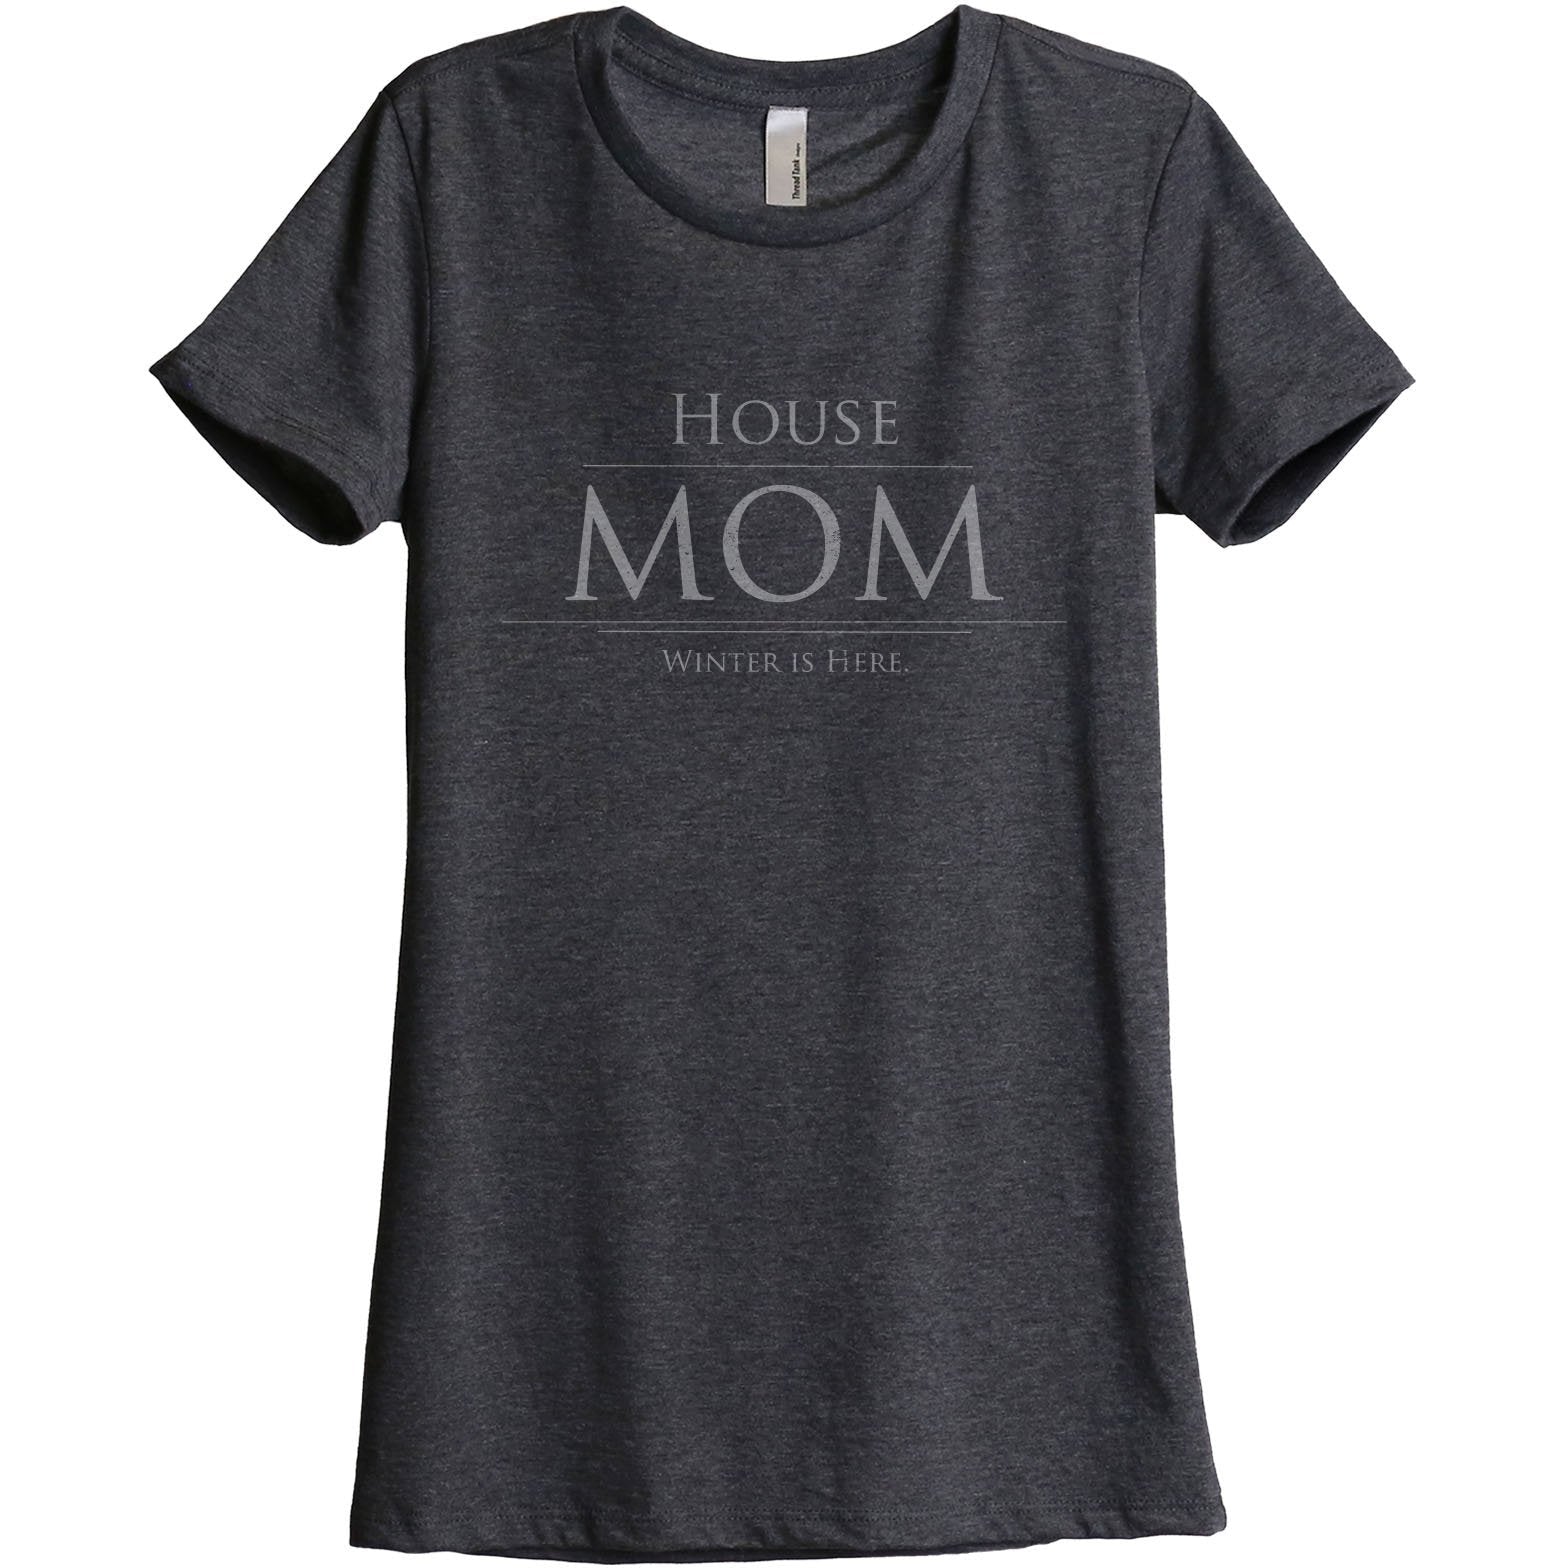 House Mom Winter Is Here Women's Relaxed Crewneck T-Shirt Top Tee Charcoal Grey
